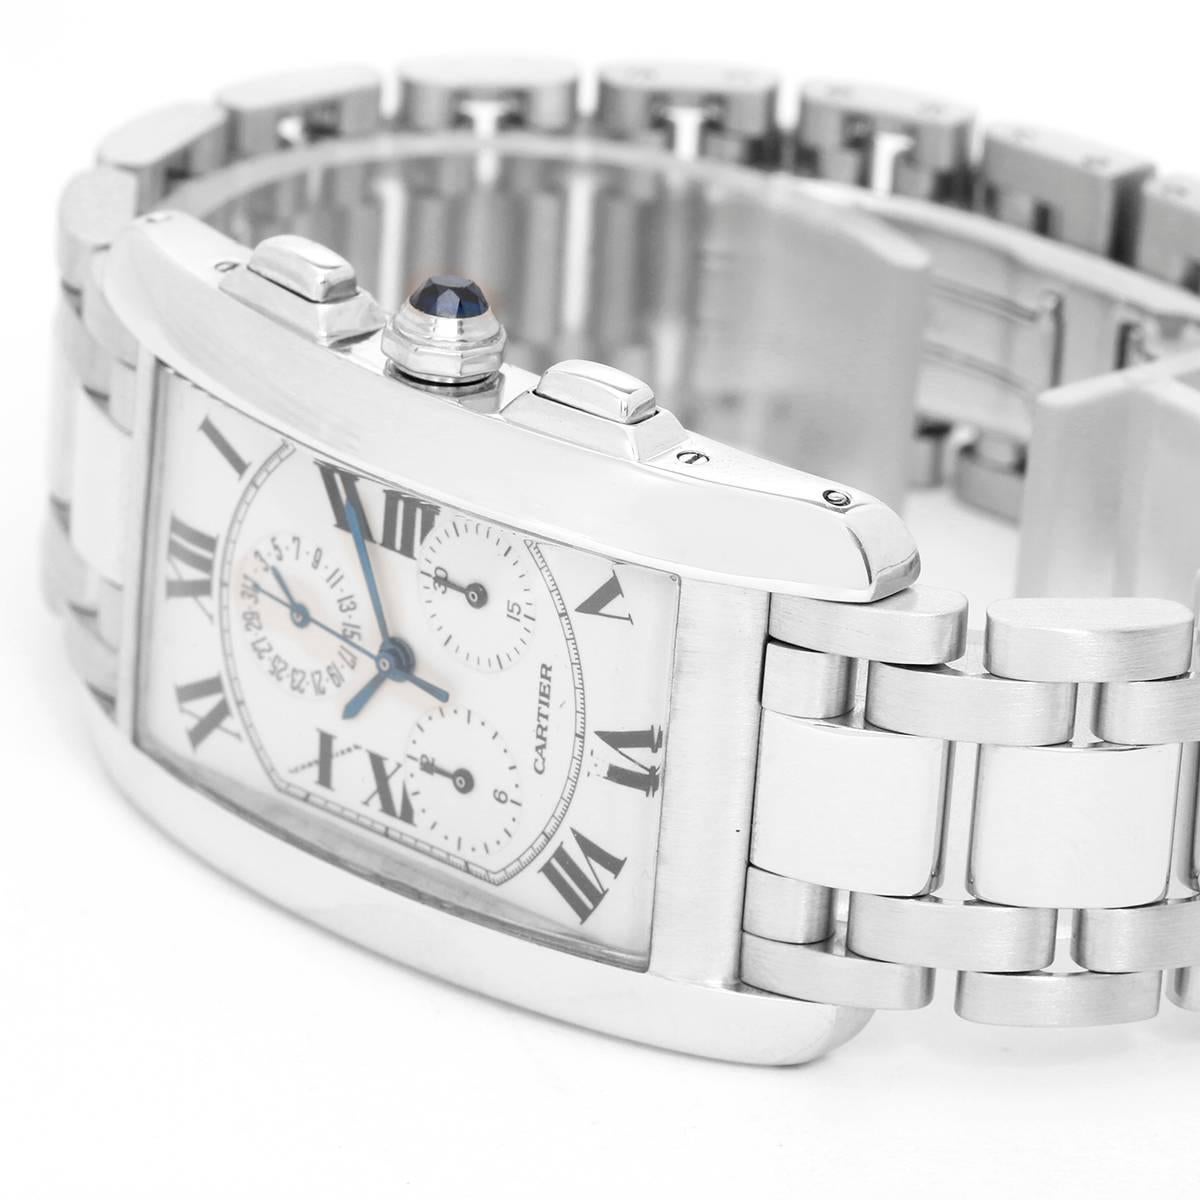 Cartier Tank Americaine Chronograph Men's/Ladies 18k White Gold Watch W260334 -  Quartz chronograph with date. 18k white gold rectangular style case (26mm x 45mm). Silvered guilloche dial with black Roman numerals; date; hour minutes and seconds